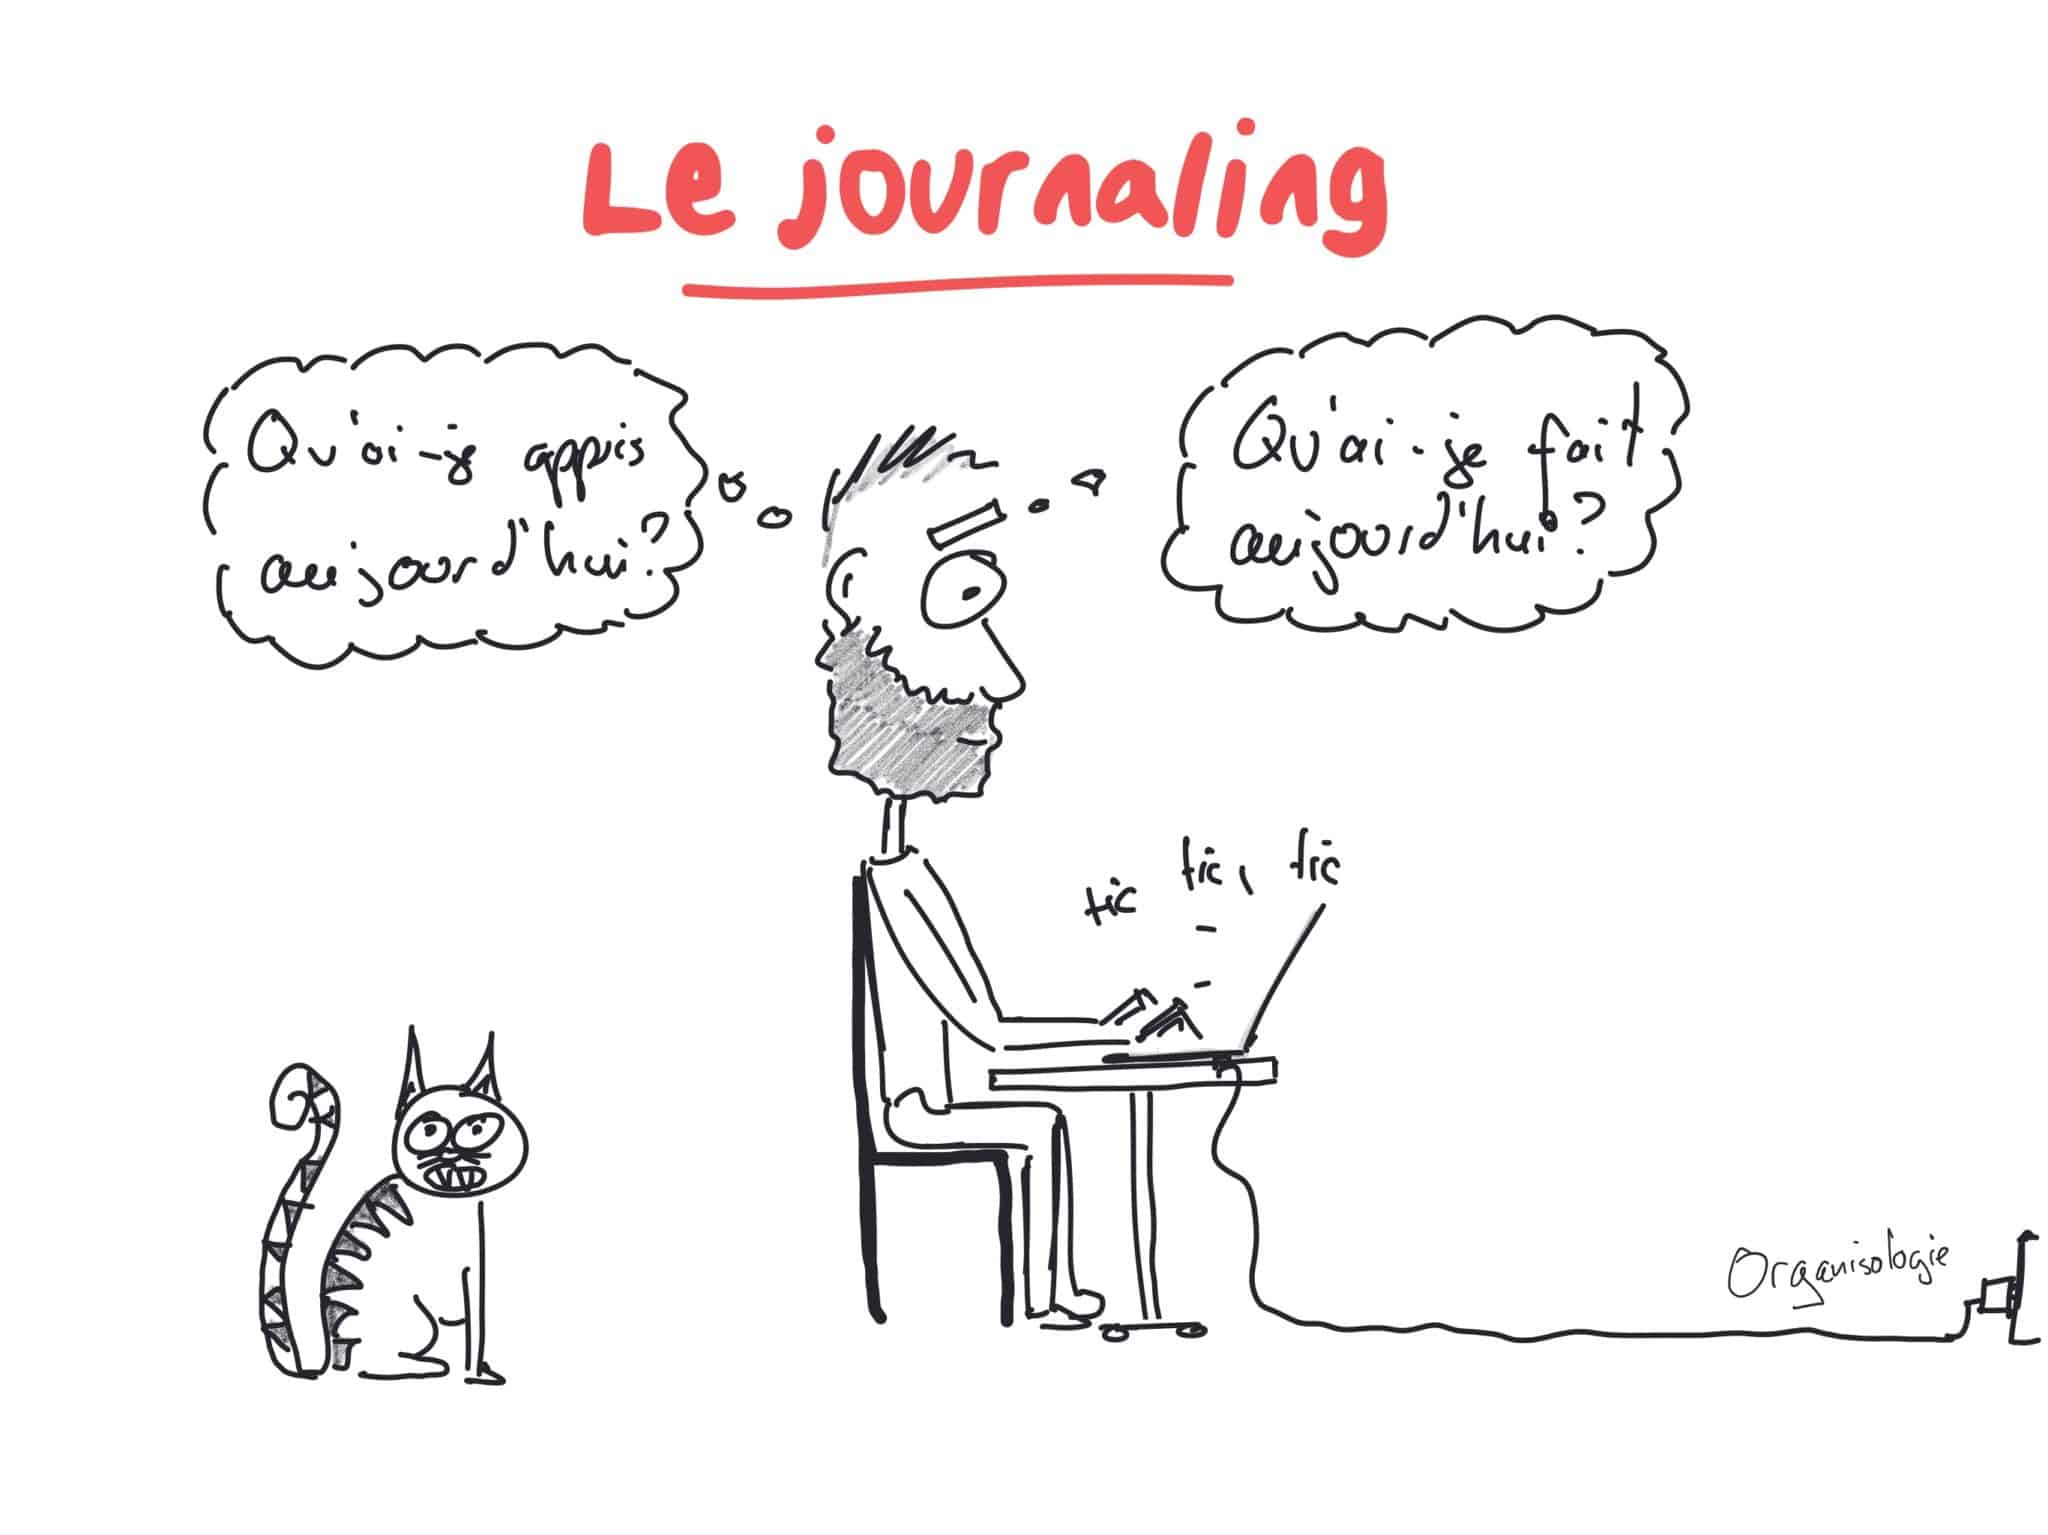 Le journaling